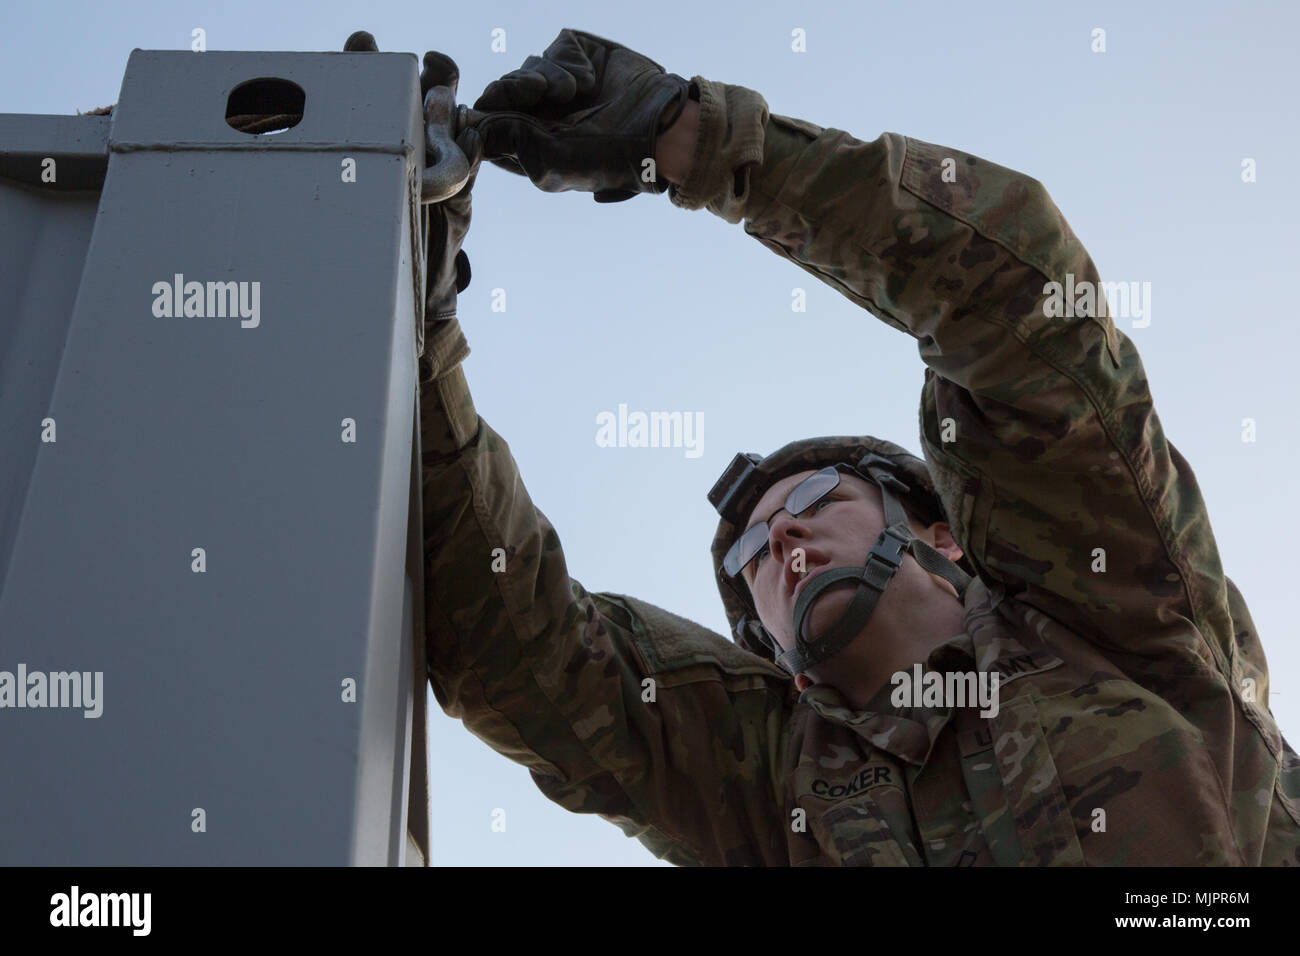 U.S. Army Soldier, Vertical PLT, 643rd ESC, 11th Engineer Battalion hooks conex to crane in South Korea, Dec. 14, 2017. A conex box was created during the Korean War and is used for accomendations for soldiers. (U.S. Army photo by Pfc. Isaih Vega) Stock Photo